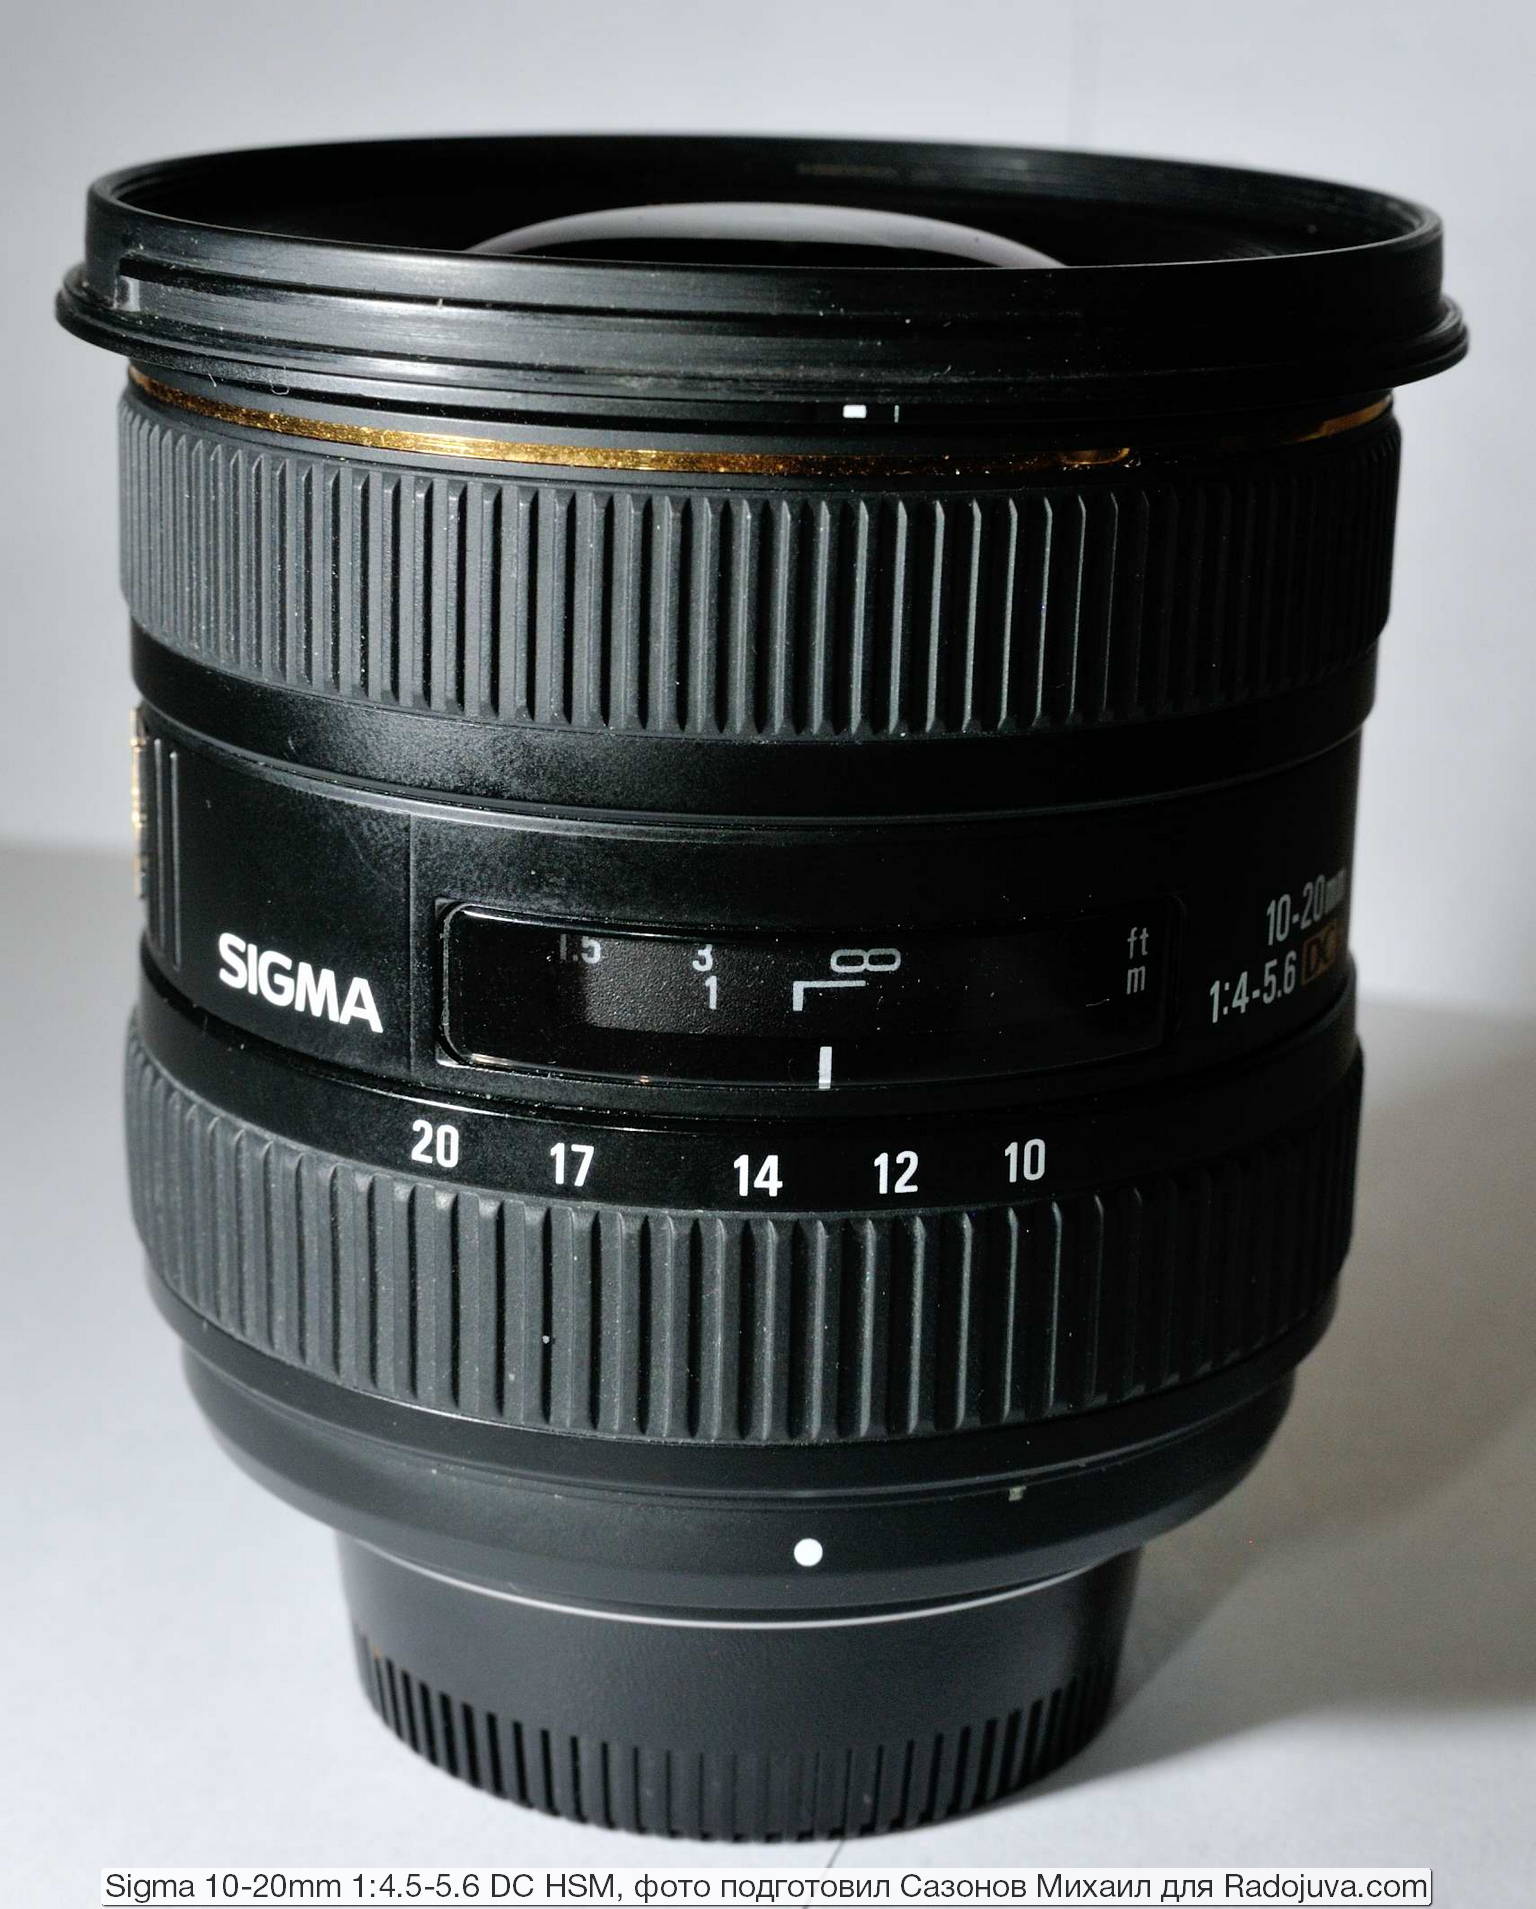 Sigma 10-20mm 1: 4.5-5.6 DC HSM. Review from the reader Radozhiva